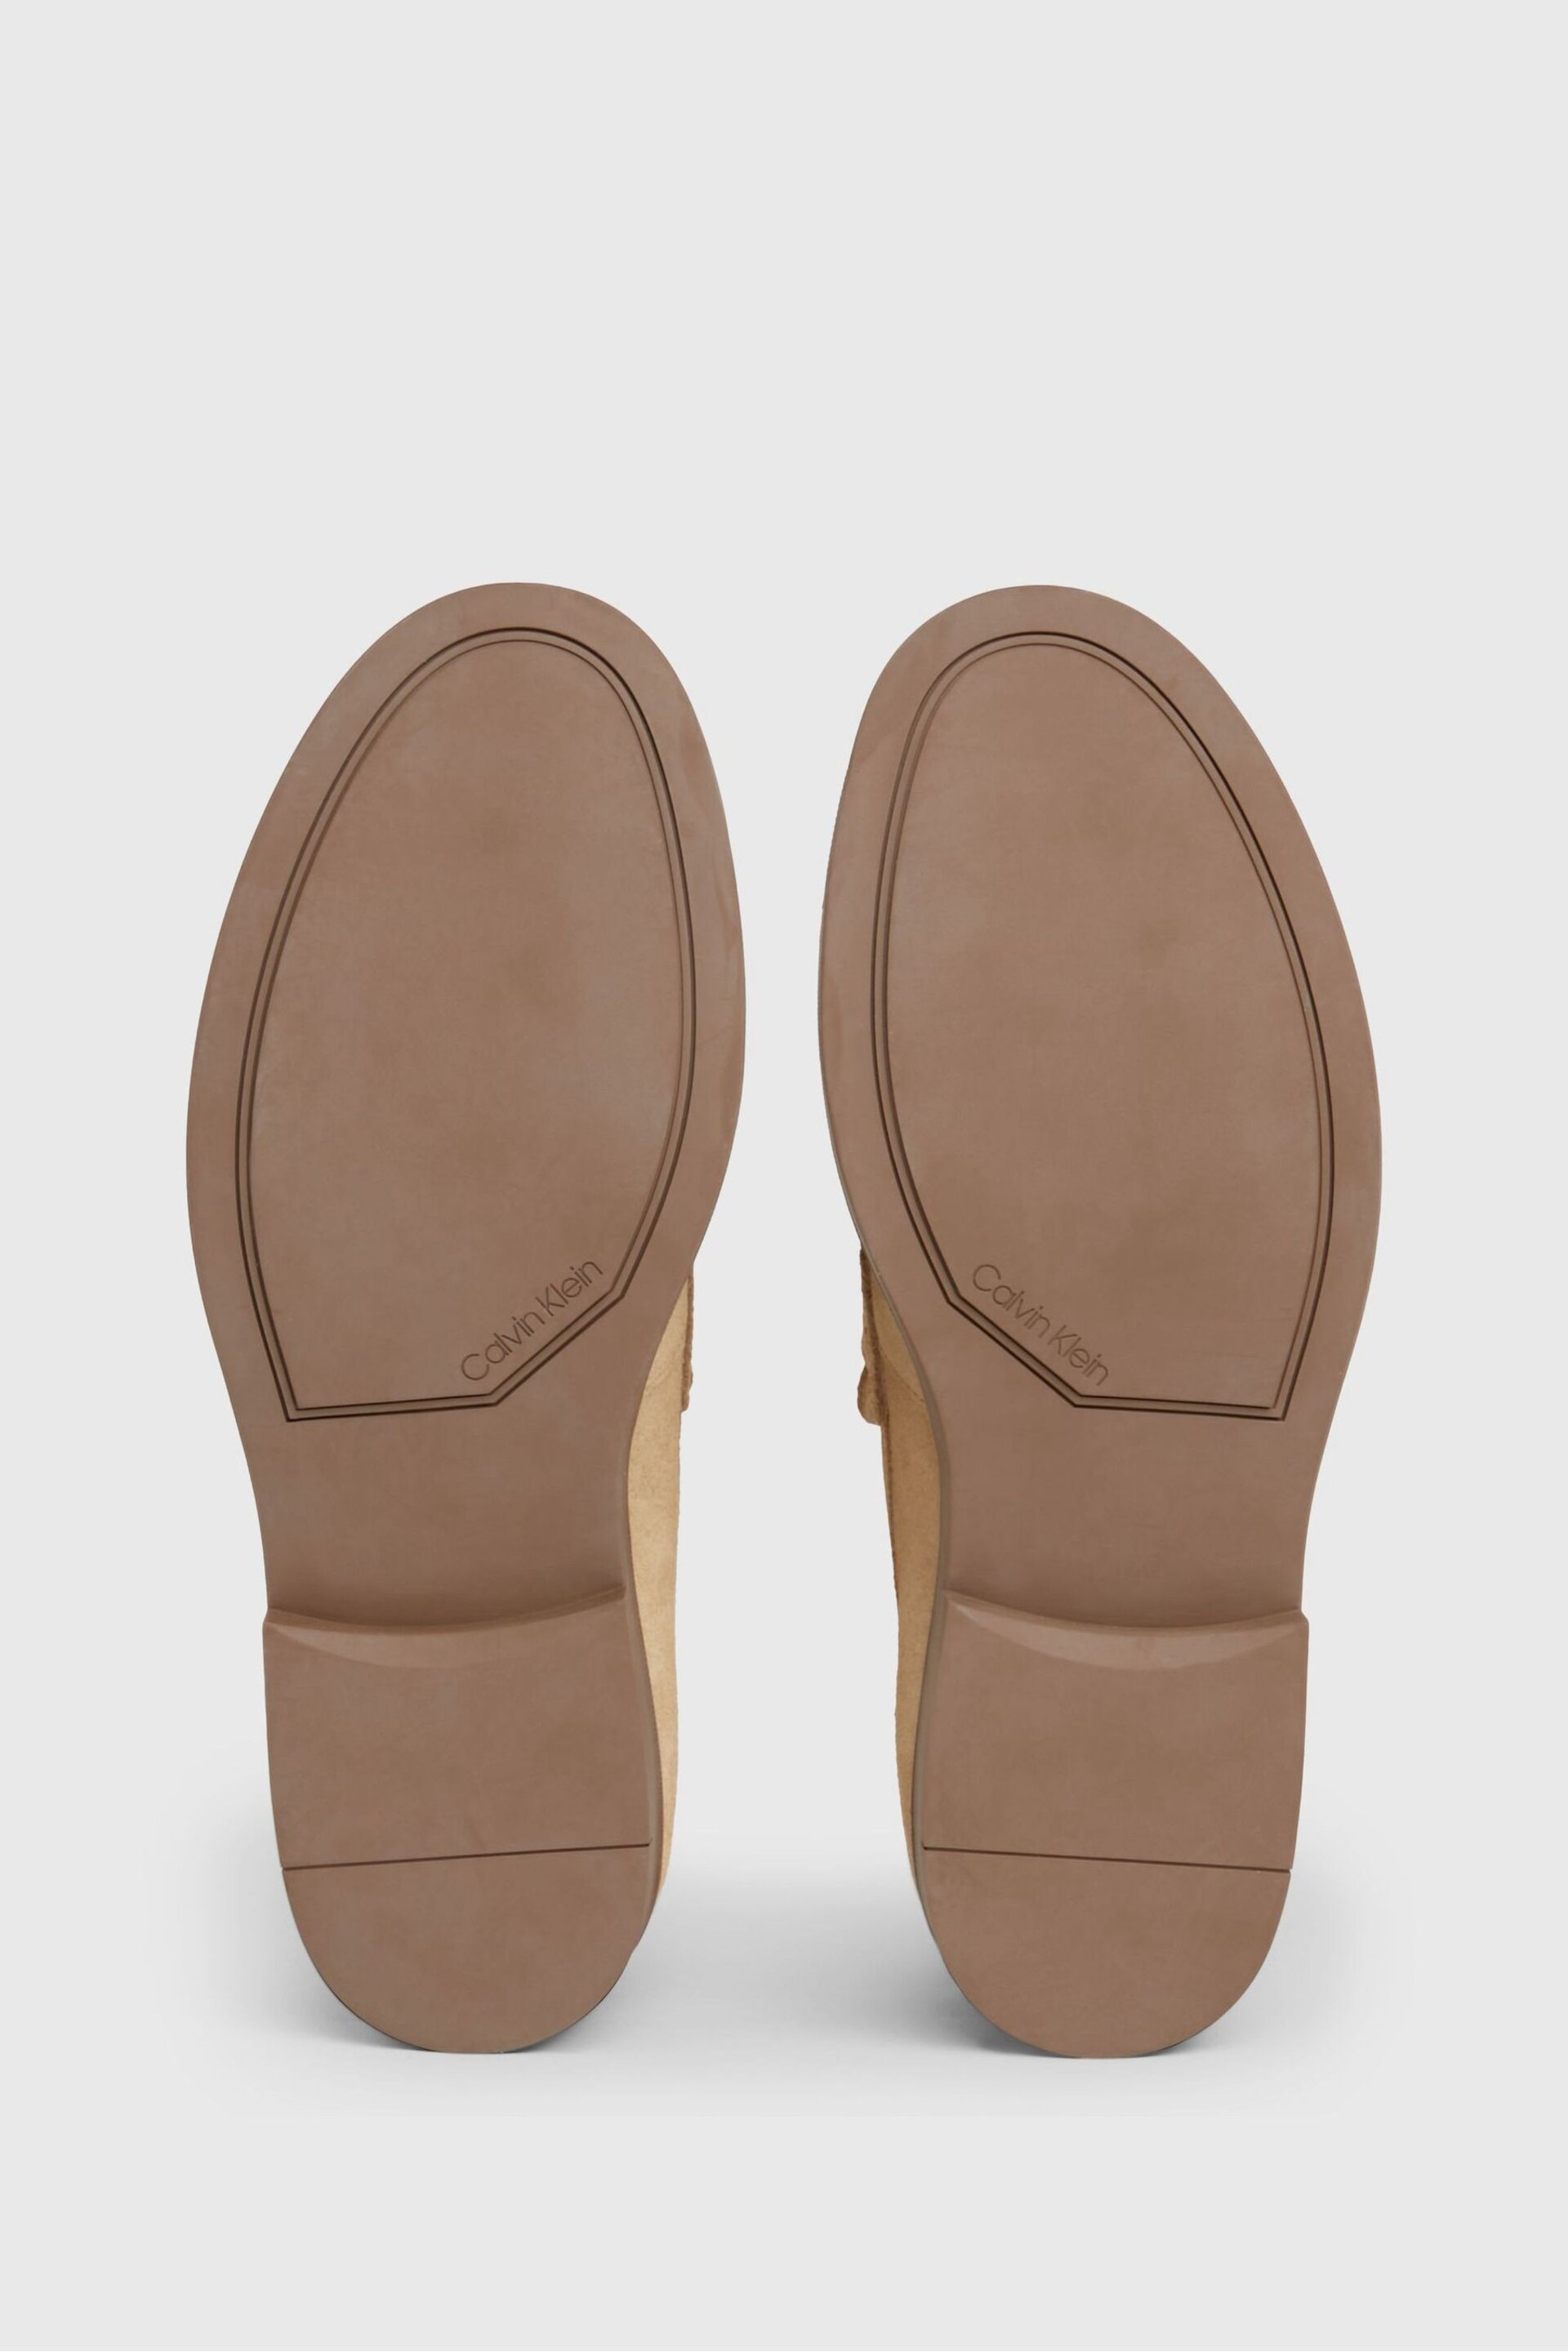 Calvin Klein Brown Moccasin Suede Loafers - Image 4 of 7